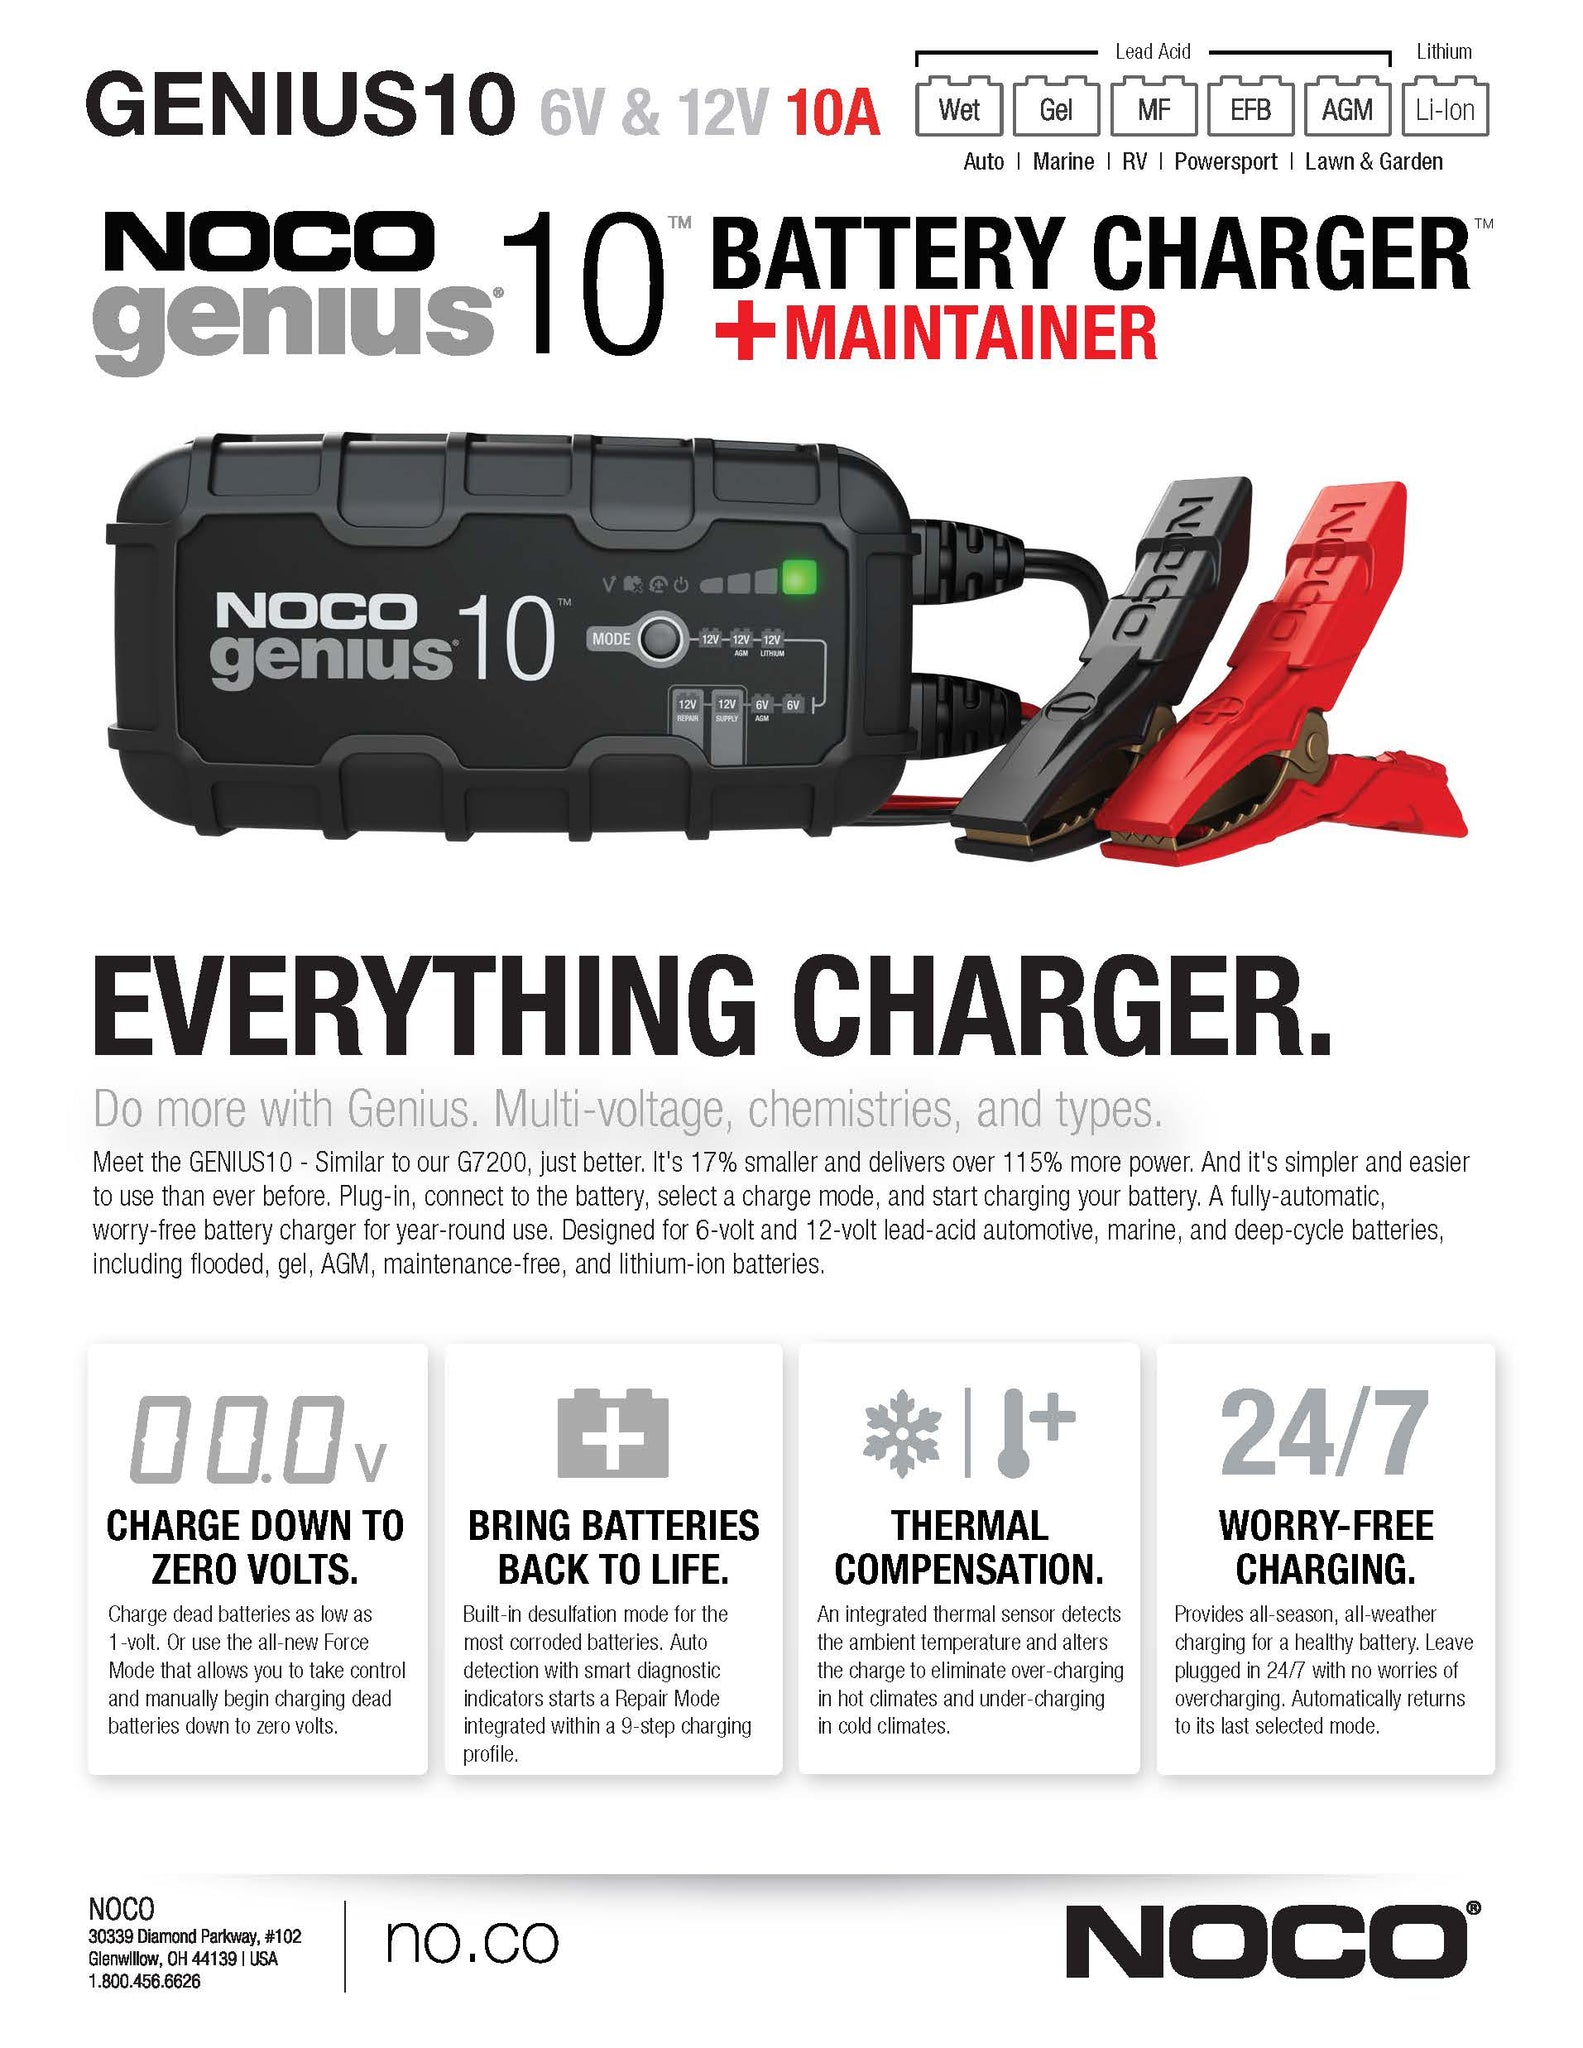 Charger/Maintainer 6/12V 10A Fully Automatic NOCO Genius